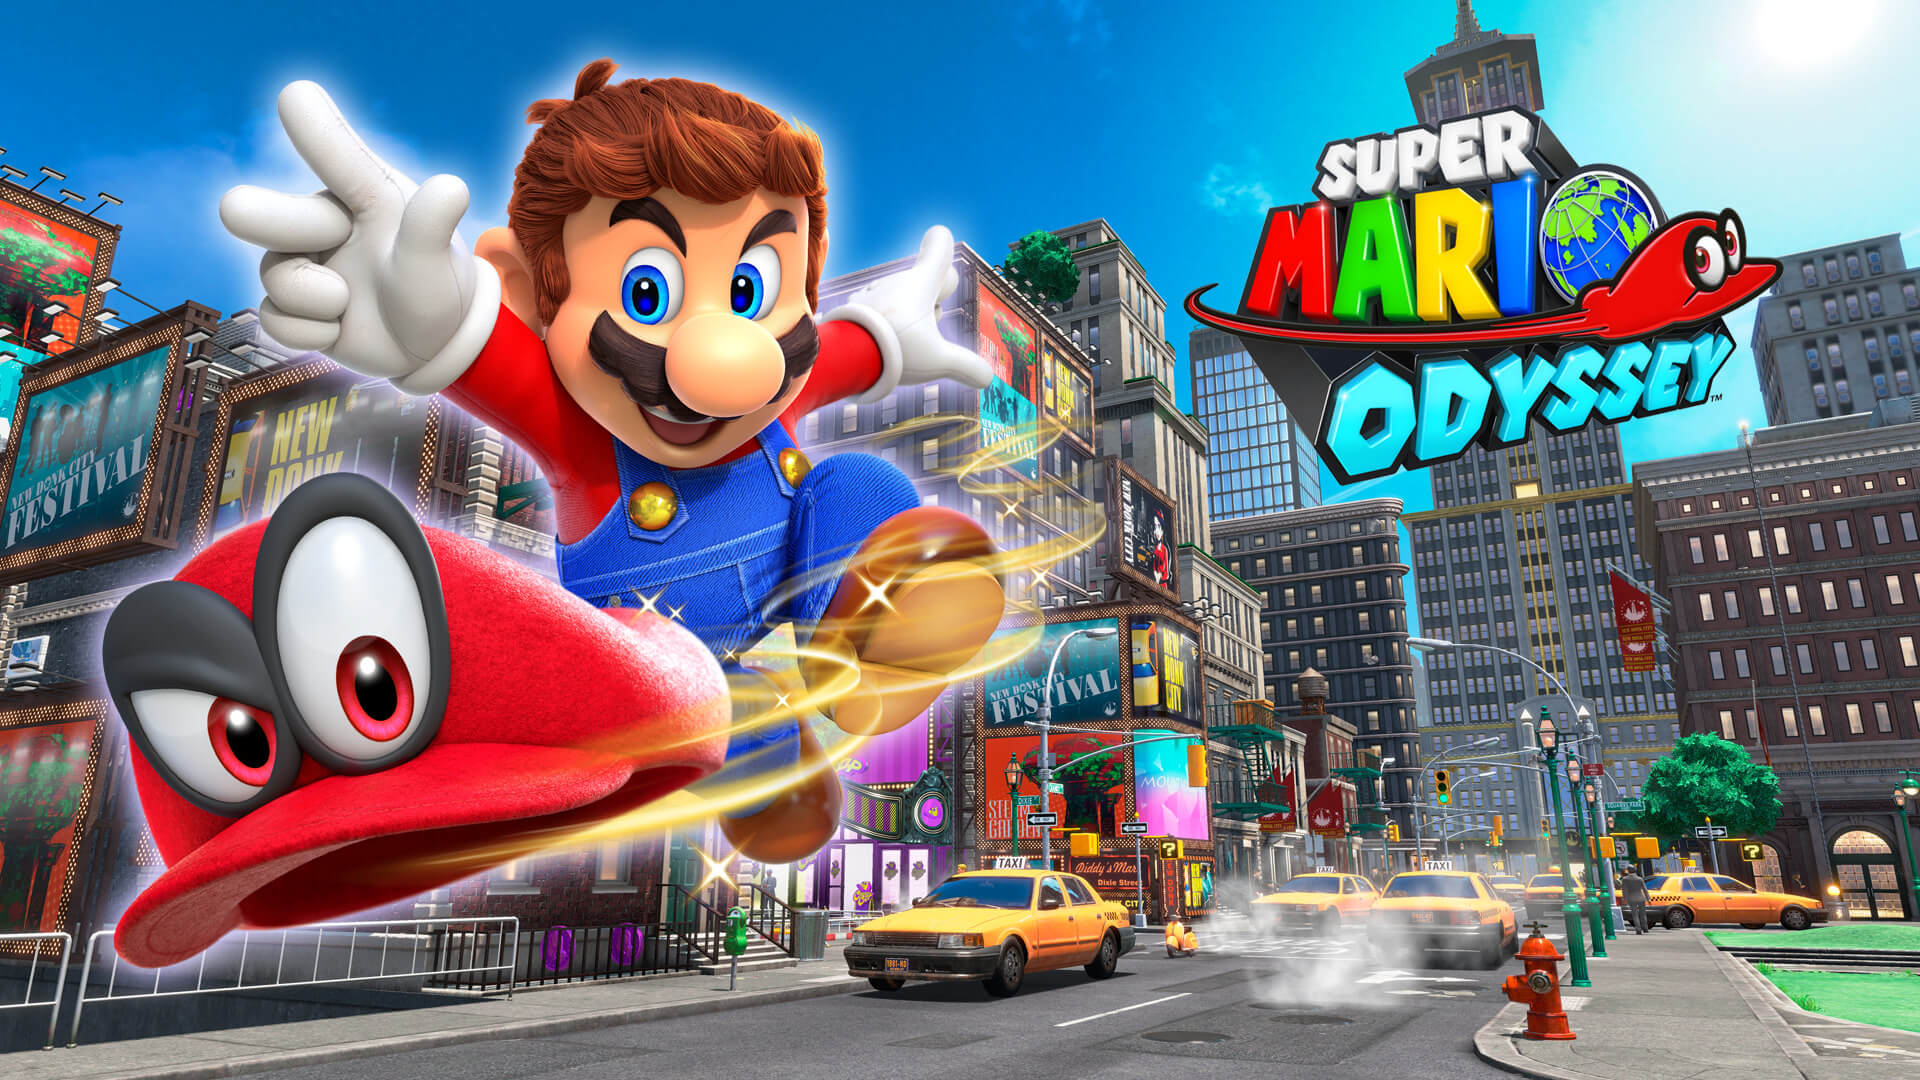 is there a working mario odyssey emulation on pc